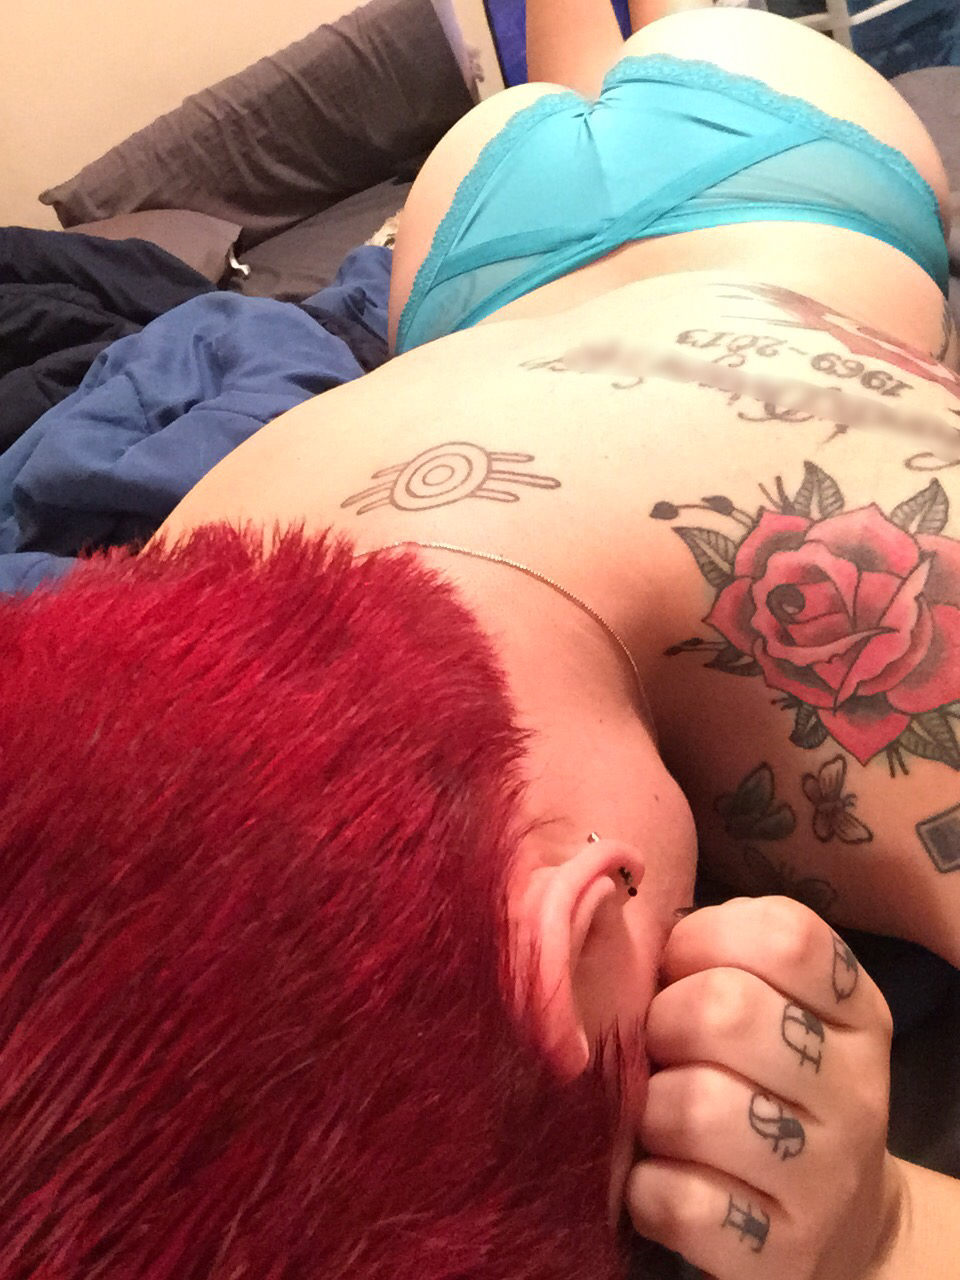 Now (f)or my back tattoos